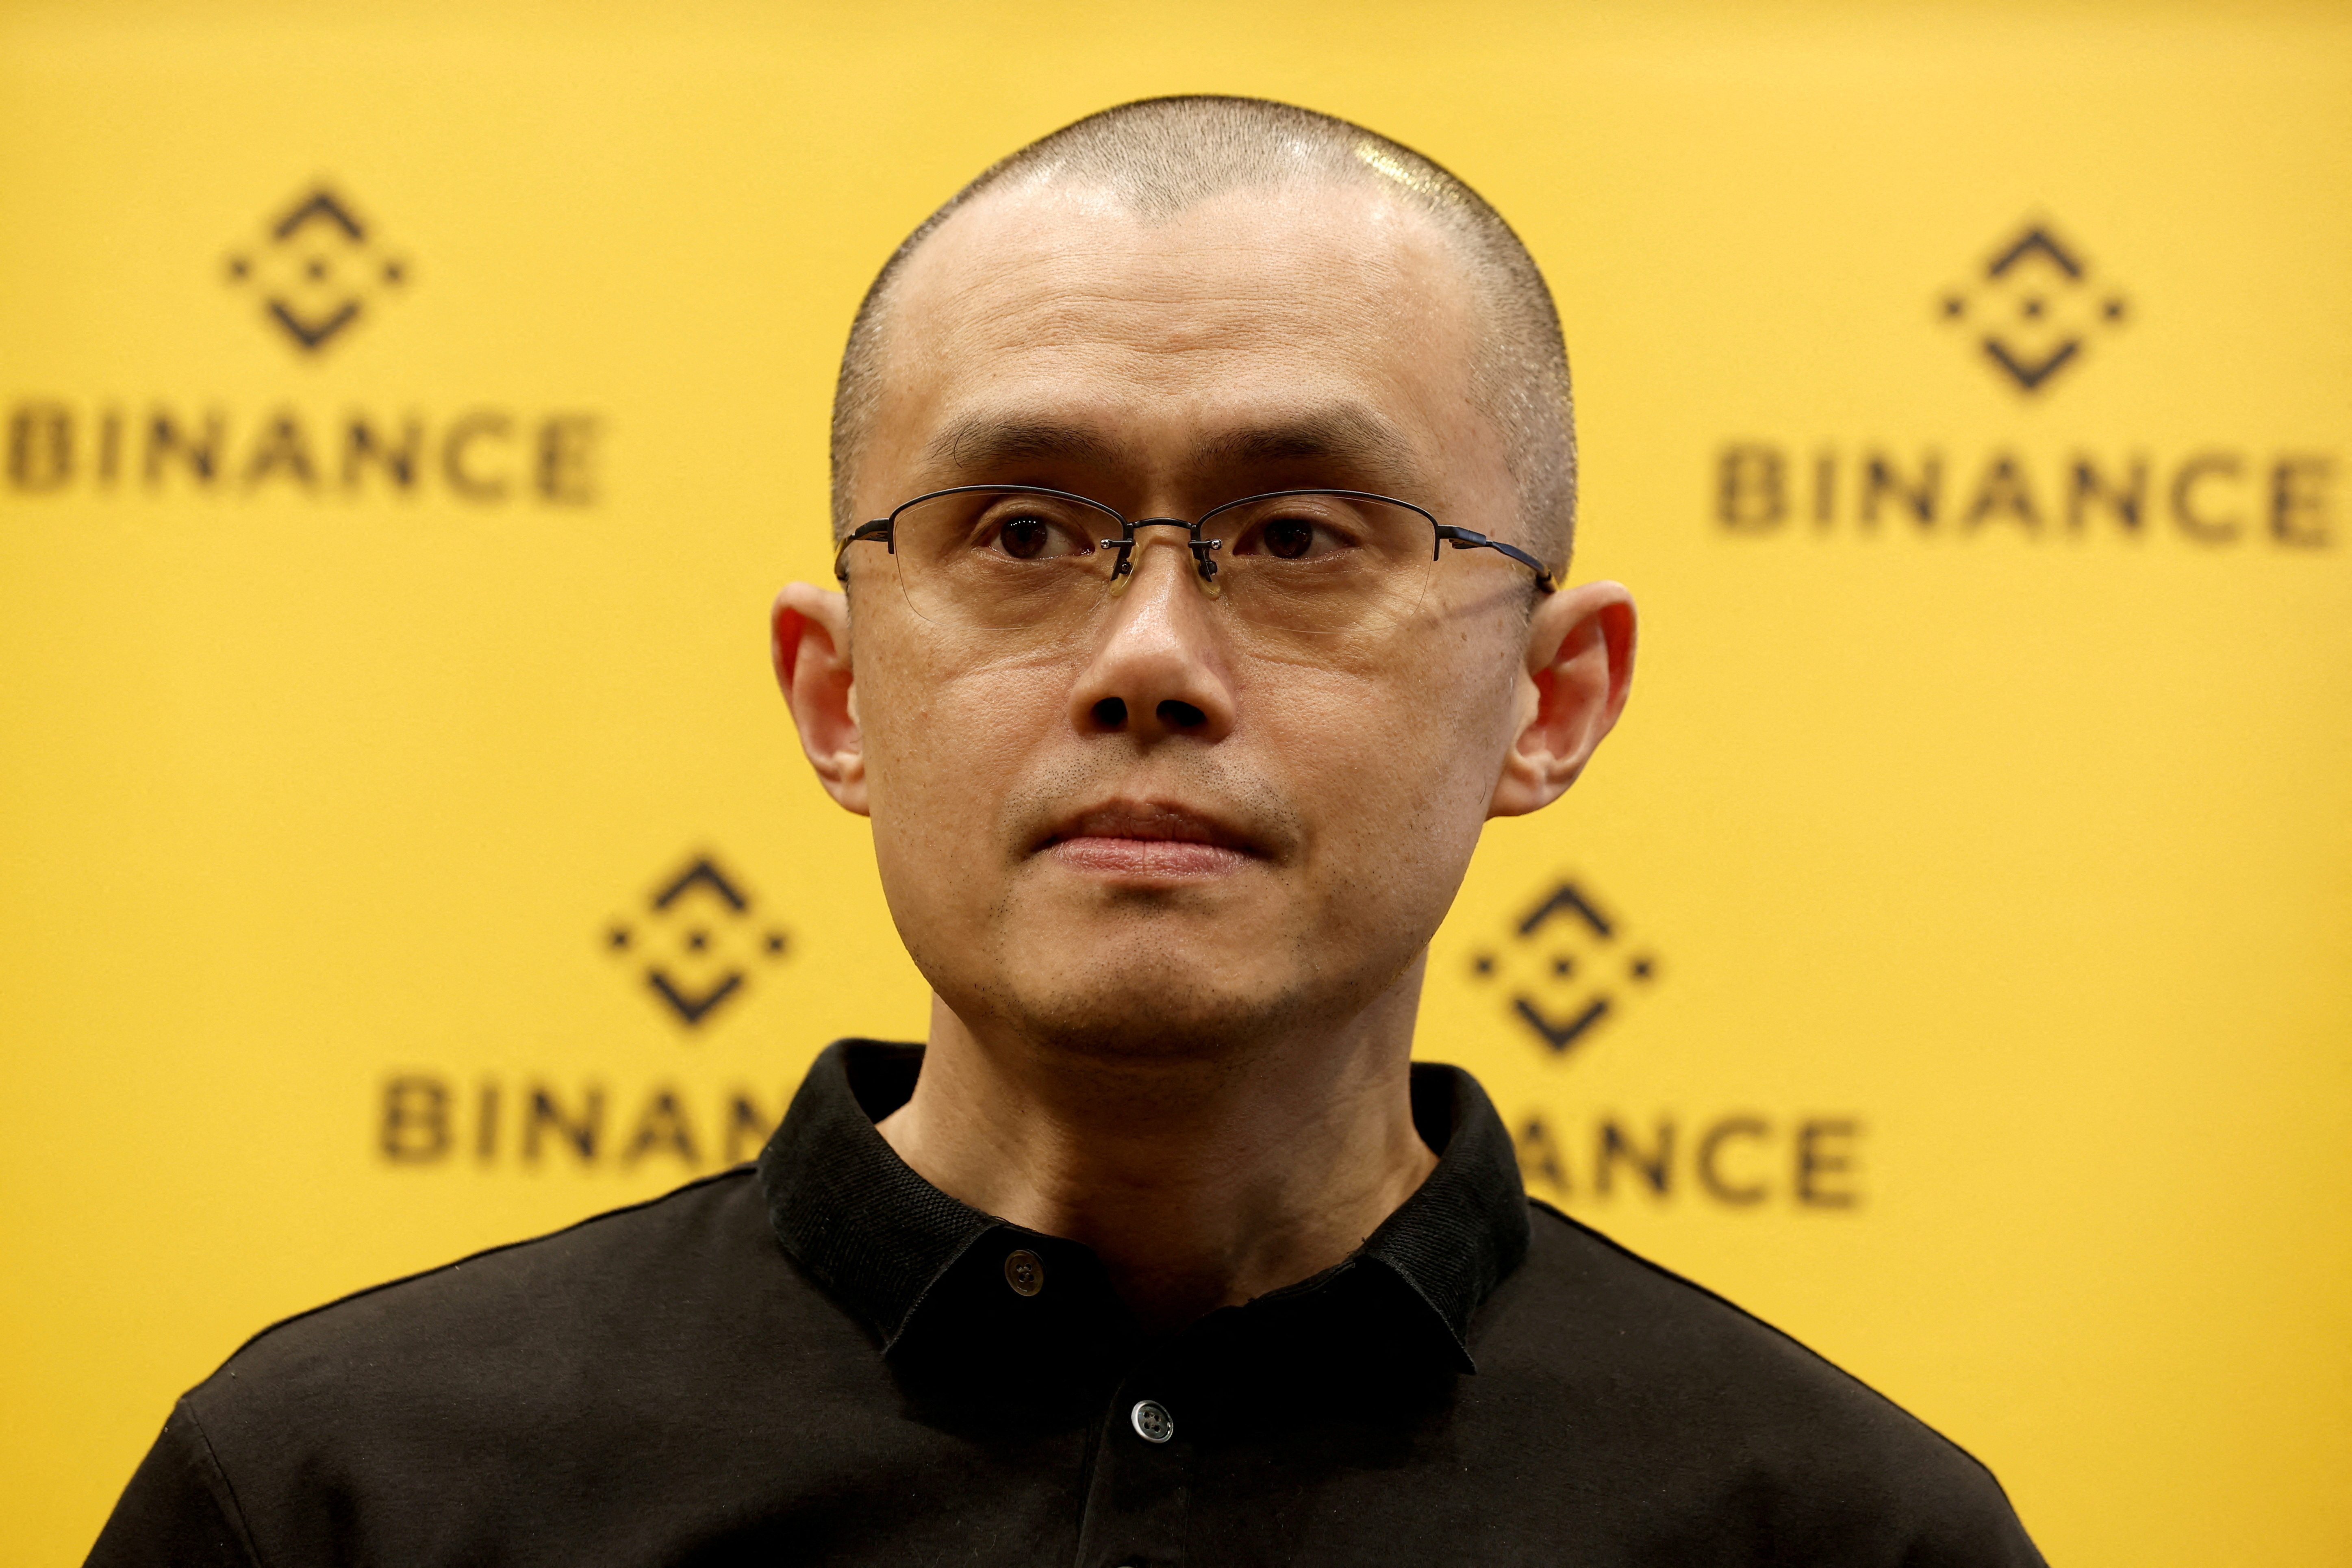 US sues Binance and founder Zhao over 'web of deception' | Reuters